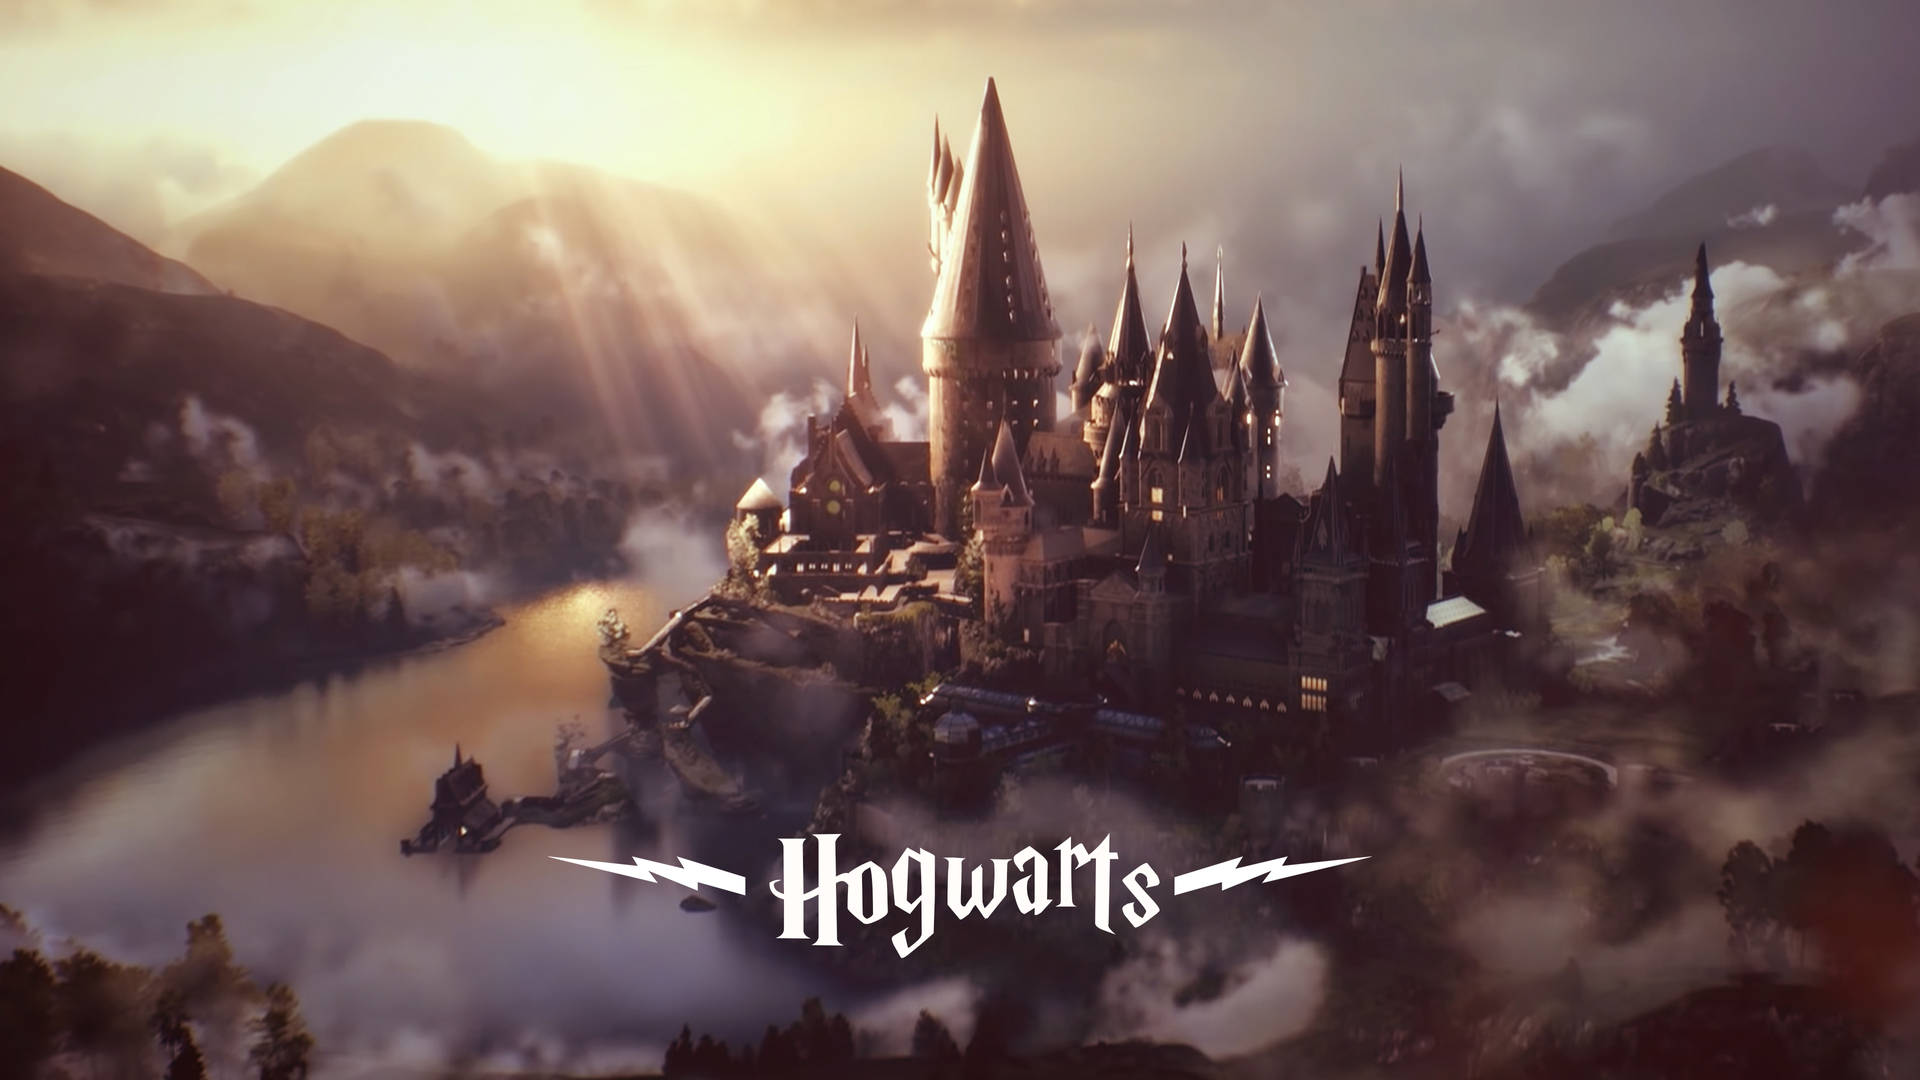 Hogwarts Aesthetic Computer Wallpaper Aesthetic Wallpapers And The Best Porn Website